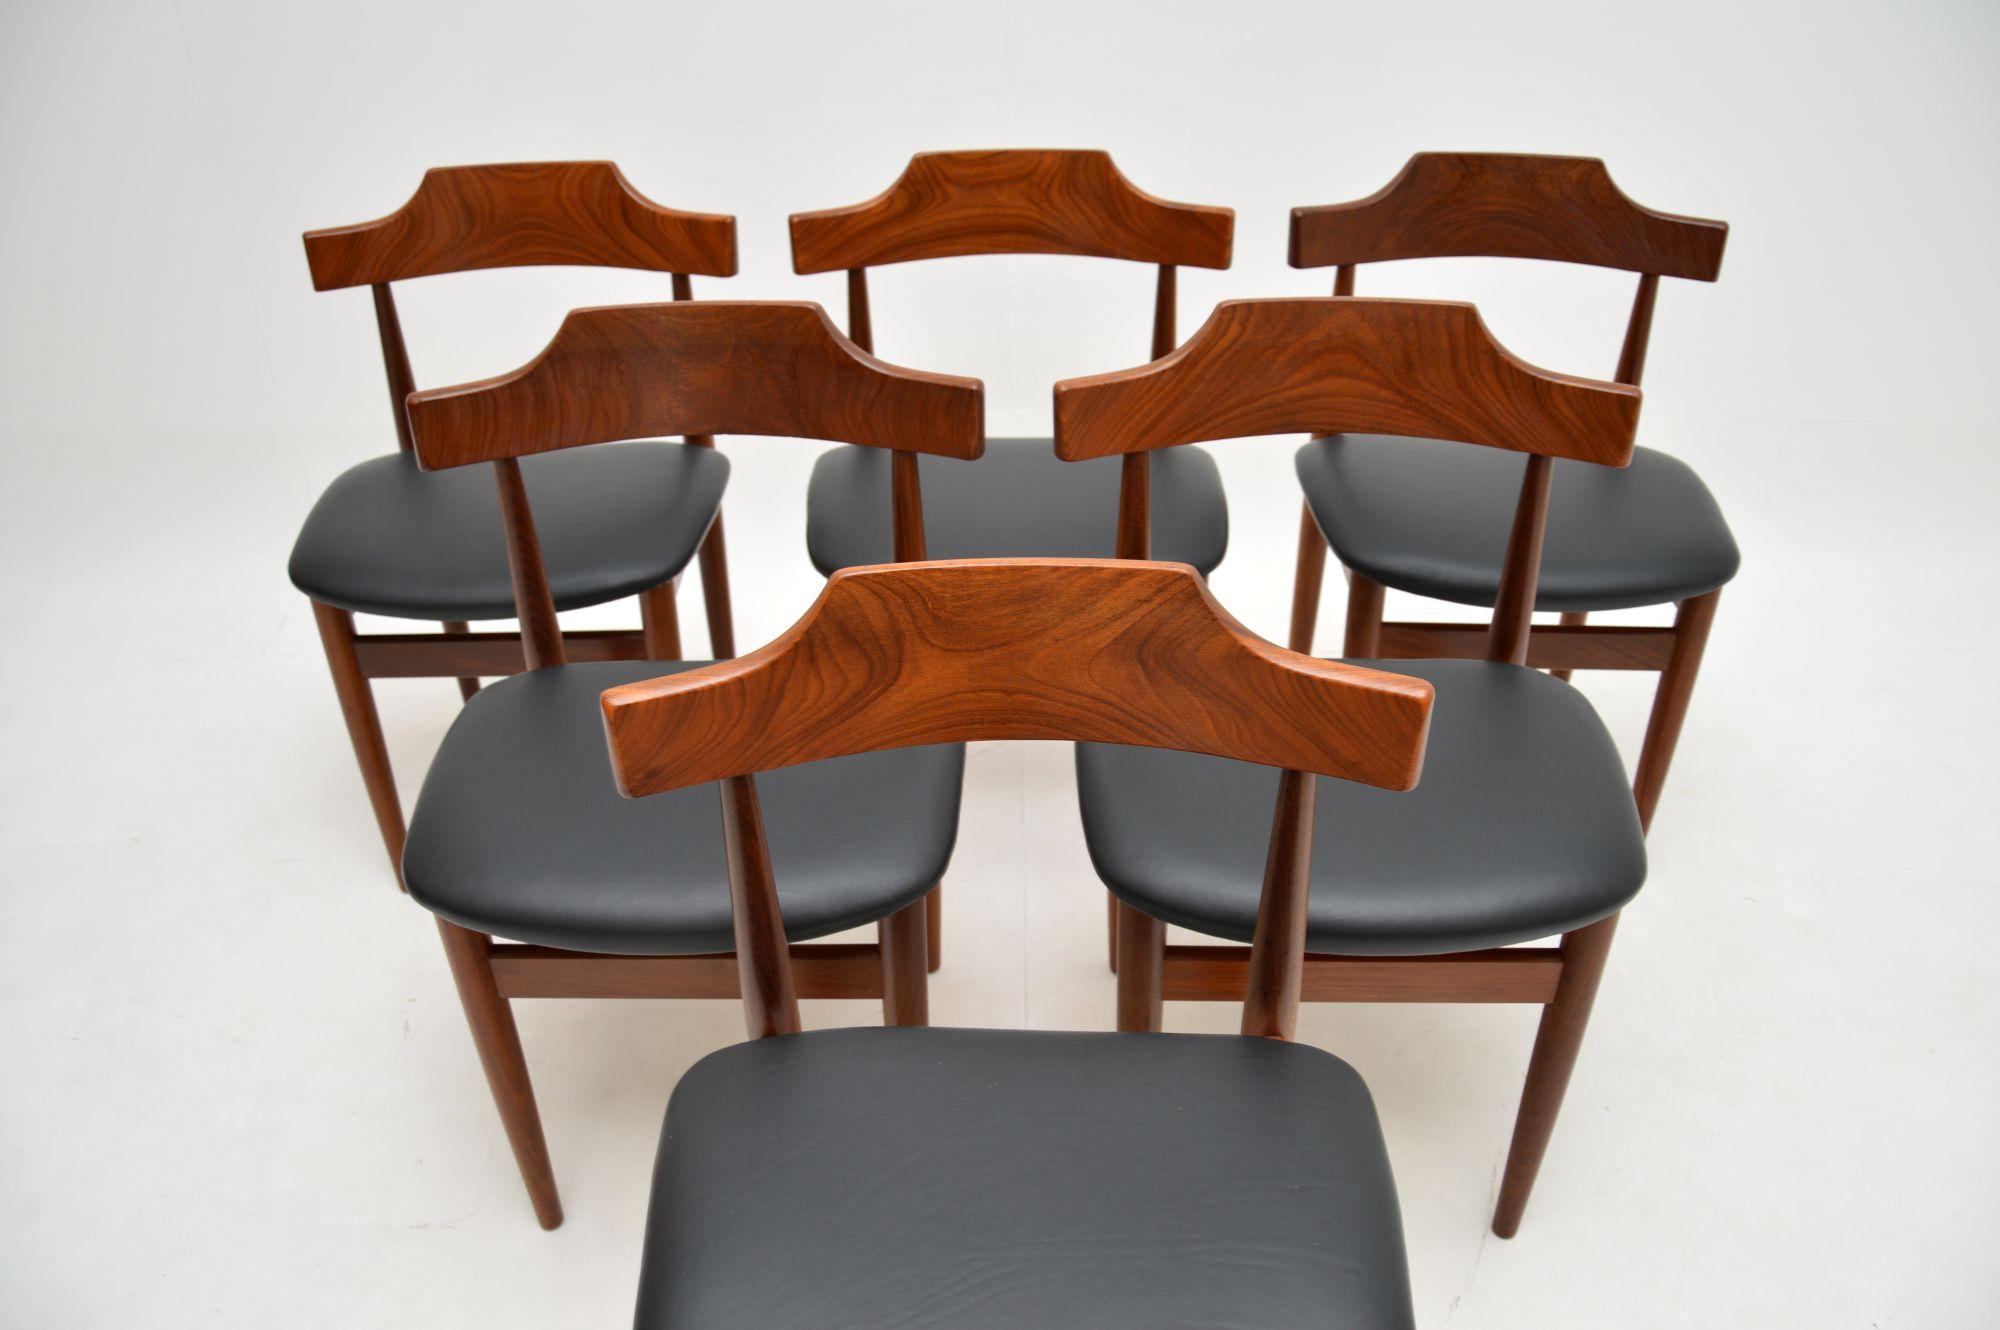 A superb set of six Danish vintage dining chairs by Hans Olsen. They were made in Denmark by Frem Rojle, they date from the 1960’s.

The quality is fantastic, they are beautifully made from solid wood, they are sturdy and supportive. They look great